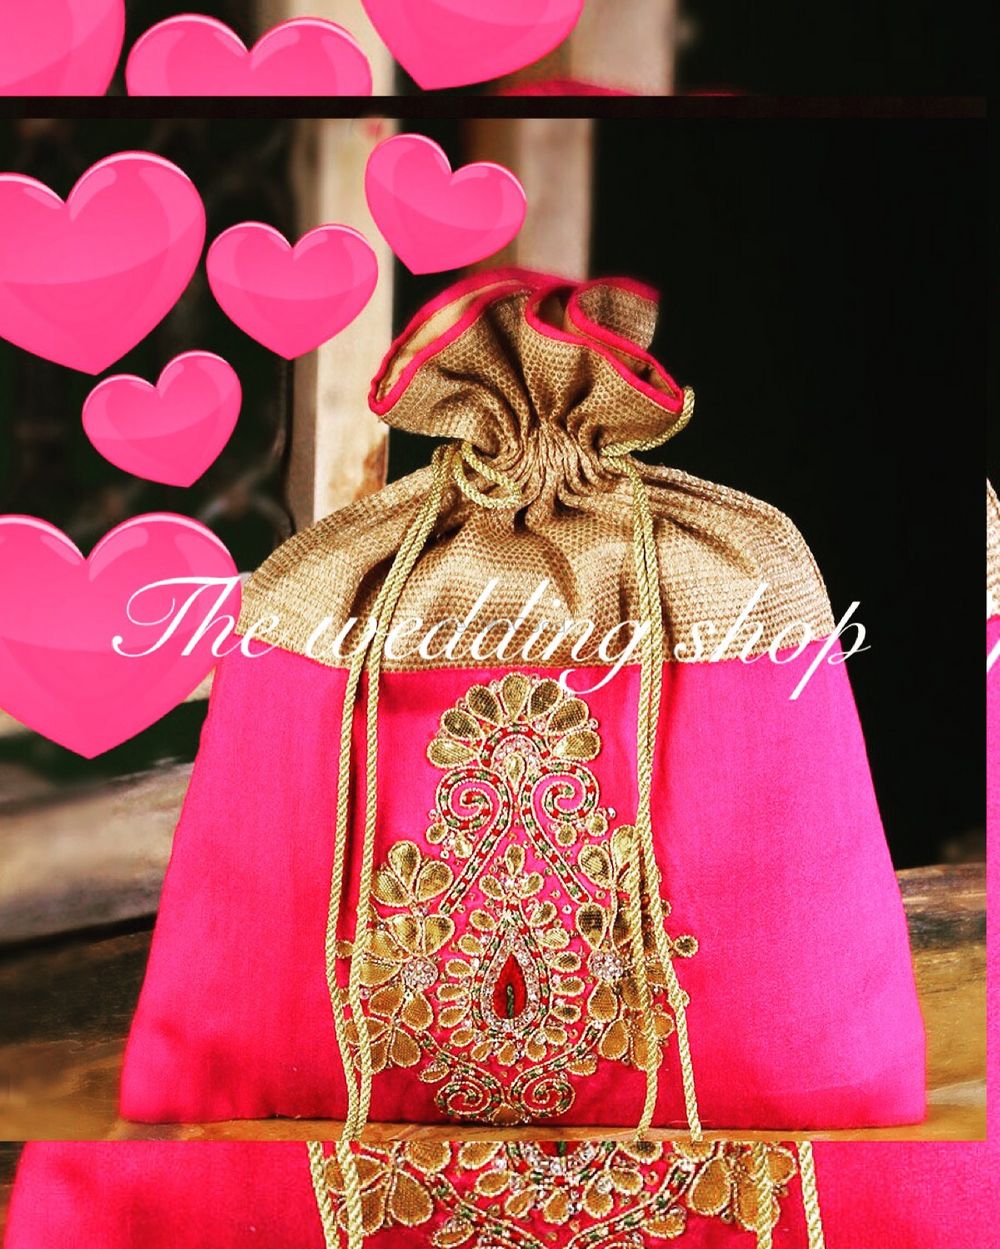 Photo By The Wedding Shop - Trousseau Packers